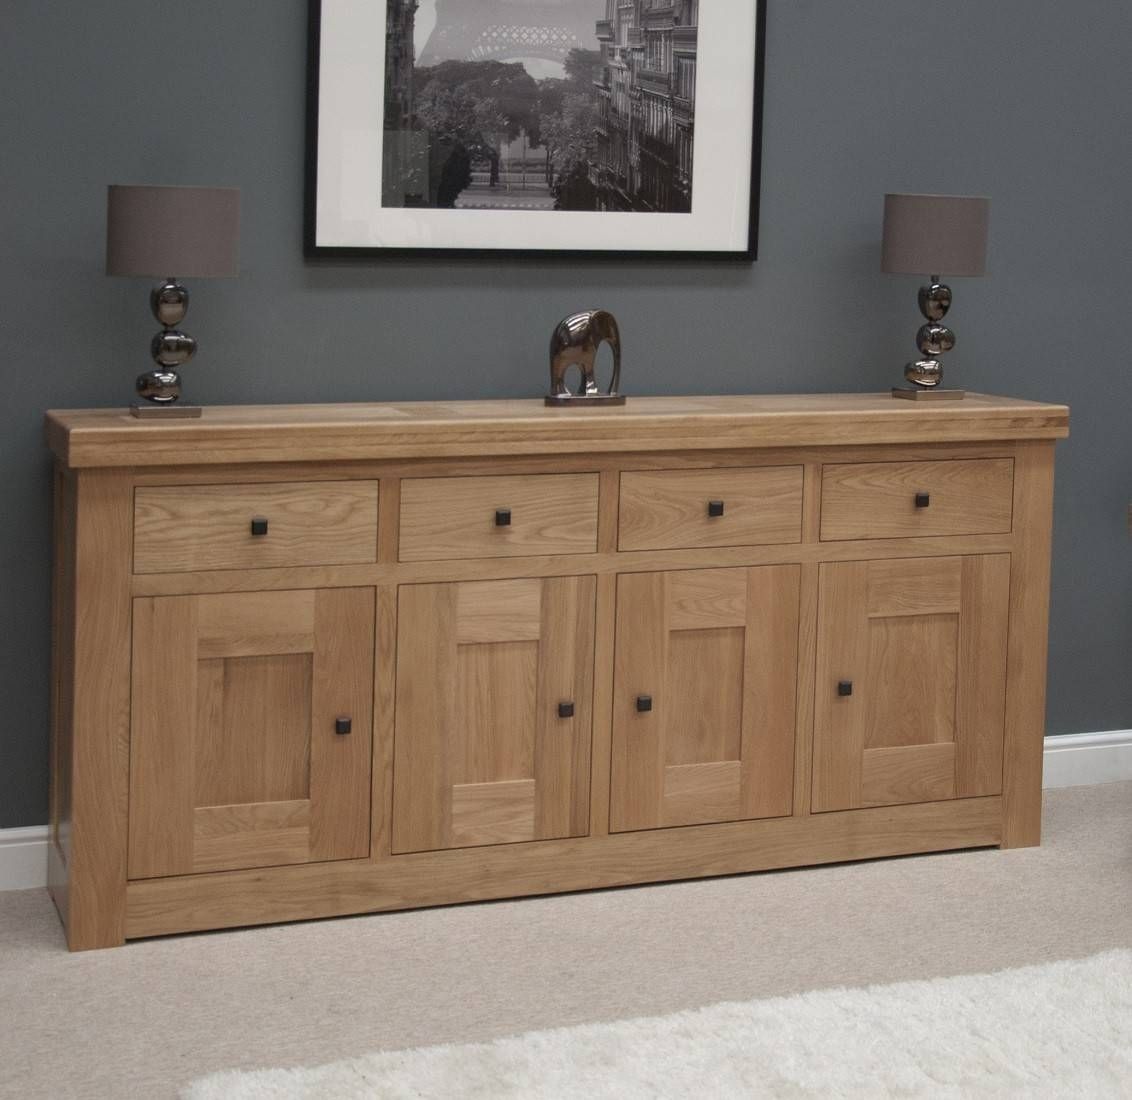 French Bordeaux Oak Extra Large 4 Door Sideboard | Oak Furniture Uk For French Sideboards (View 13 of 15)